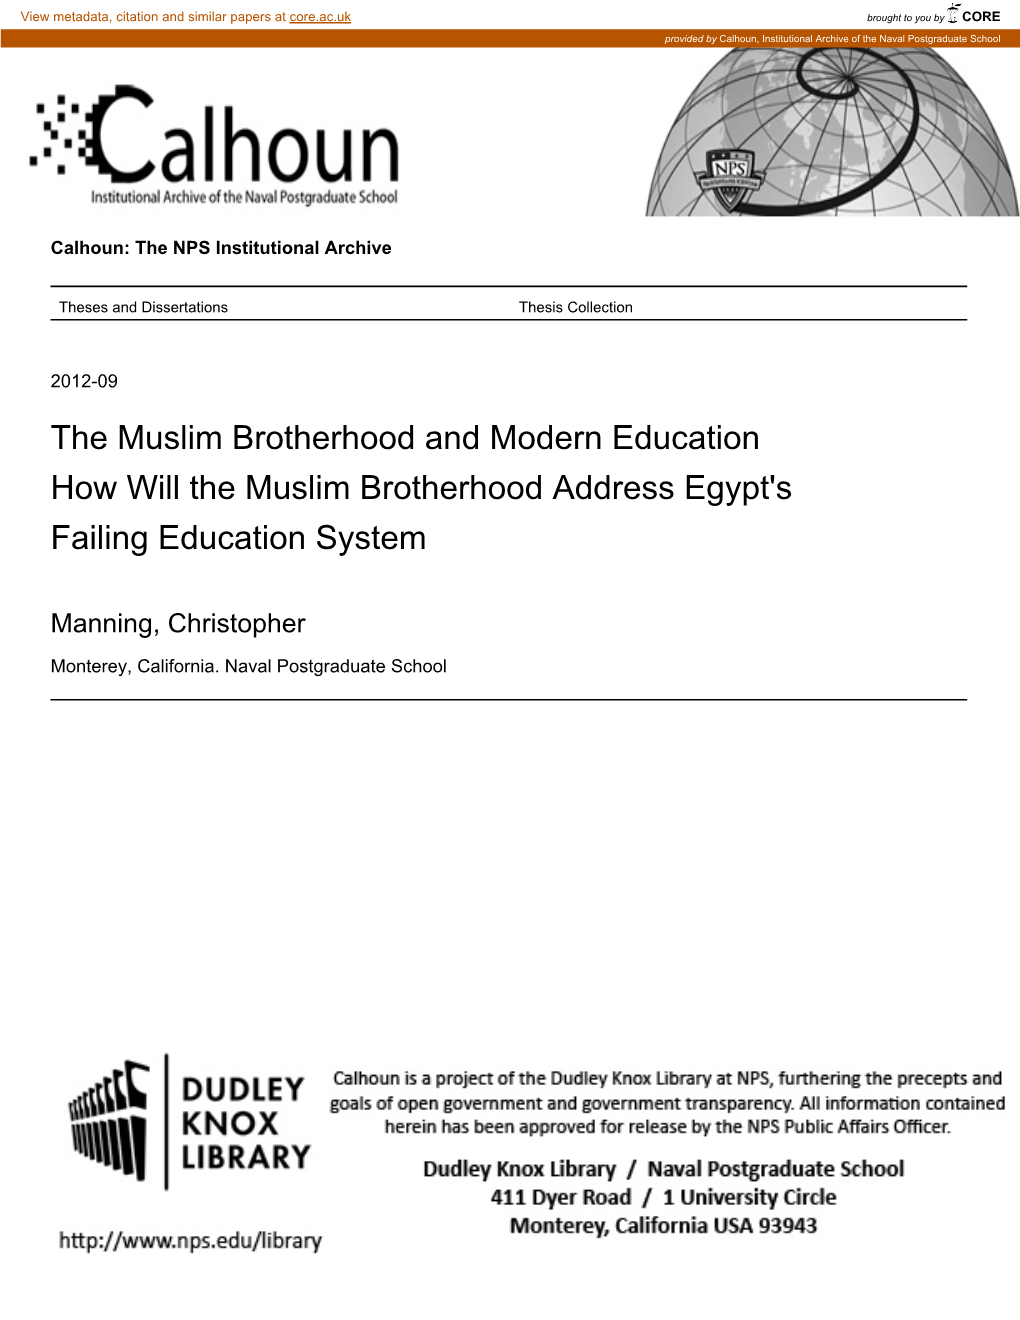 The Muslim Brotherhood and Modern Education How Will the Muslim Brotherhood Address Egypt's Failing Education System